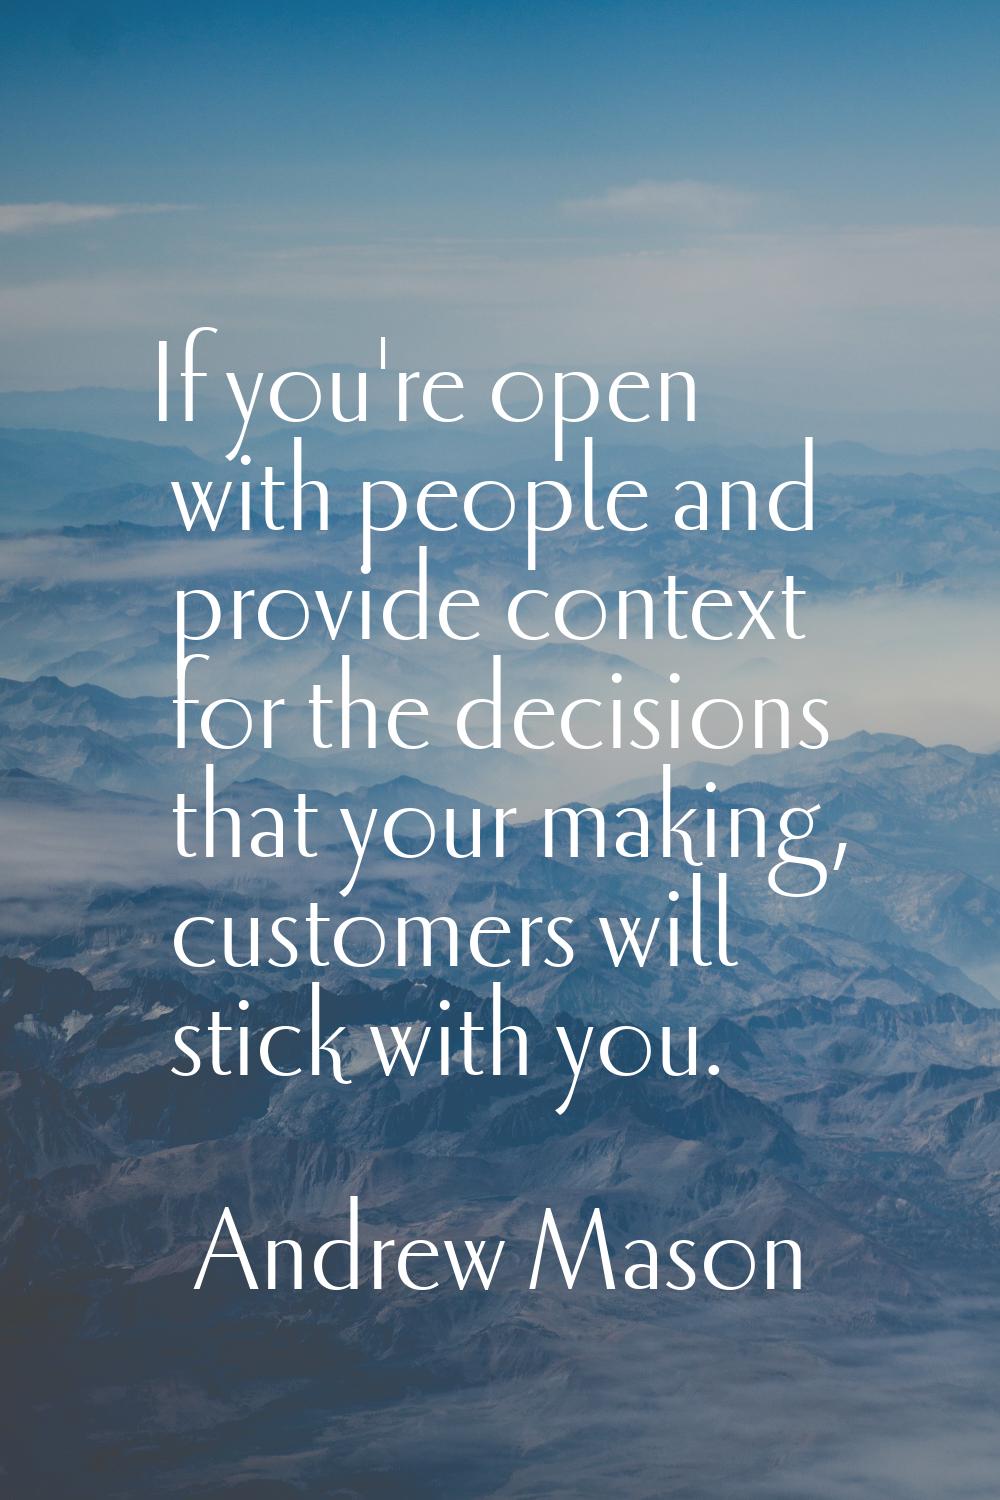 If you're open with people and provide context for the decisions that your making, customers will s